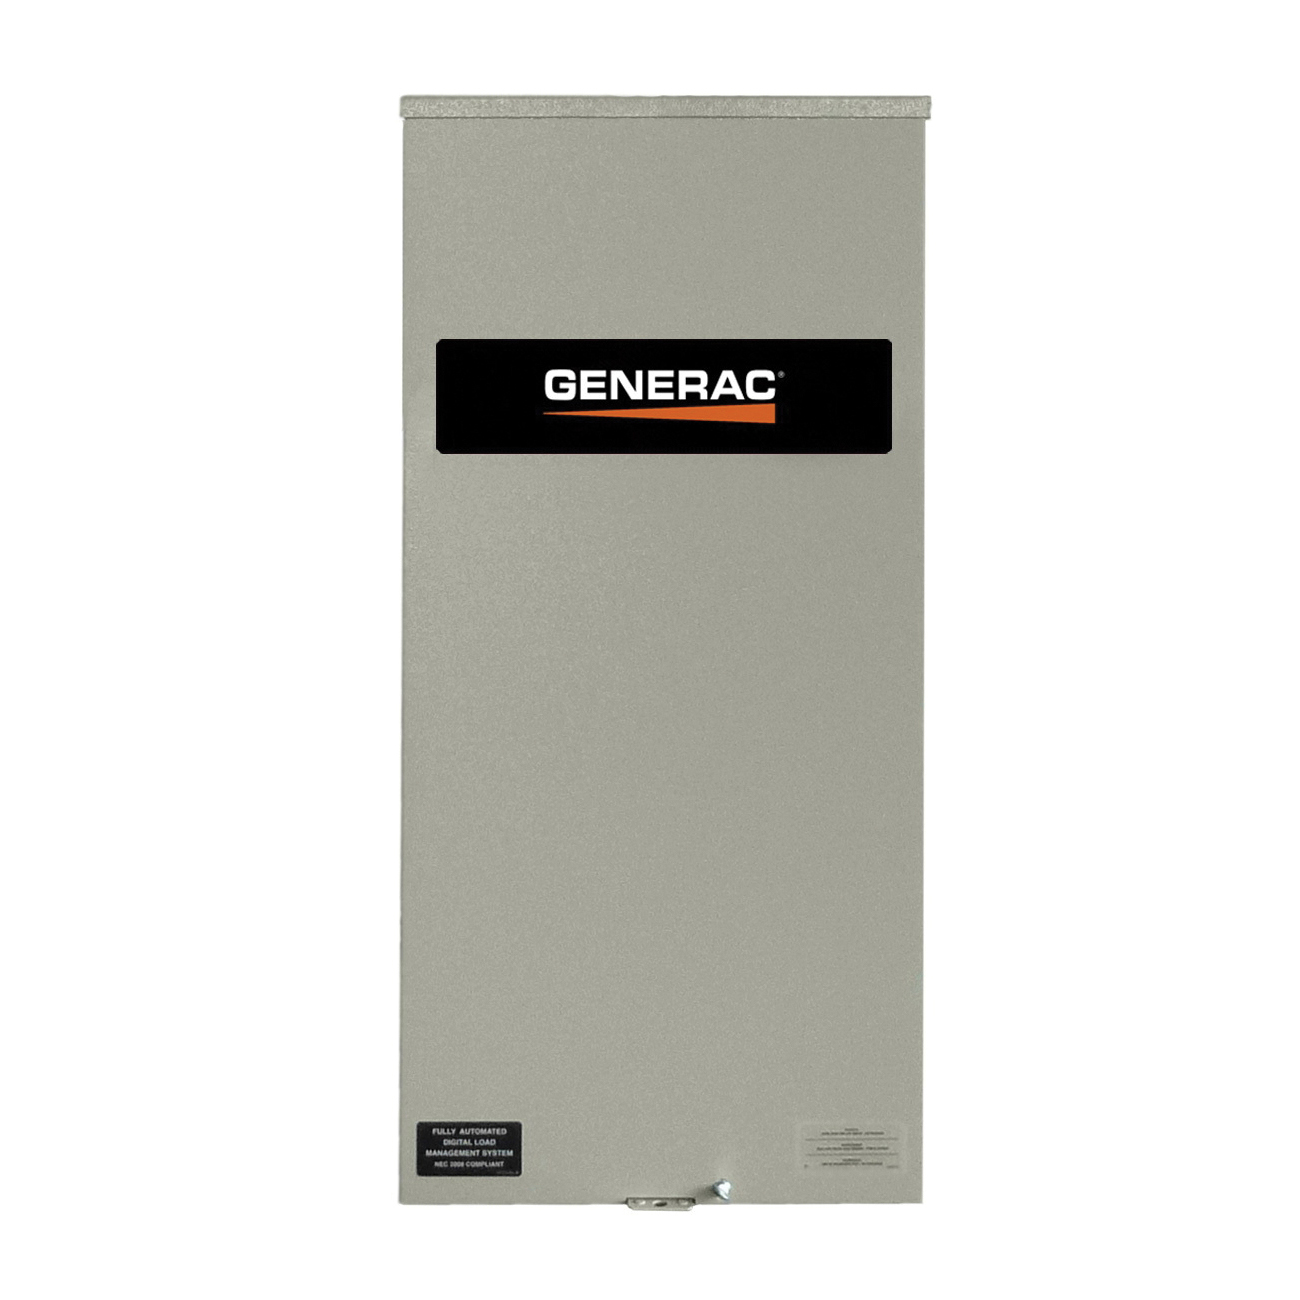 Generac® RXSW200A3 Automatic Transfer Switch, 120/240 V, 200 A, 1-Phase, Aluminum, Gray